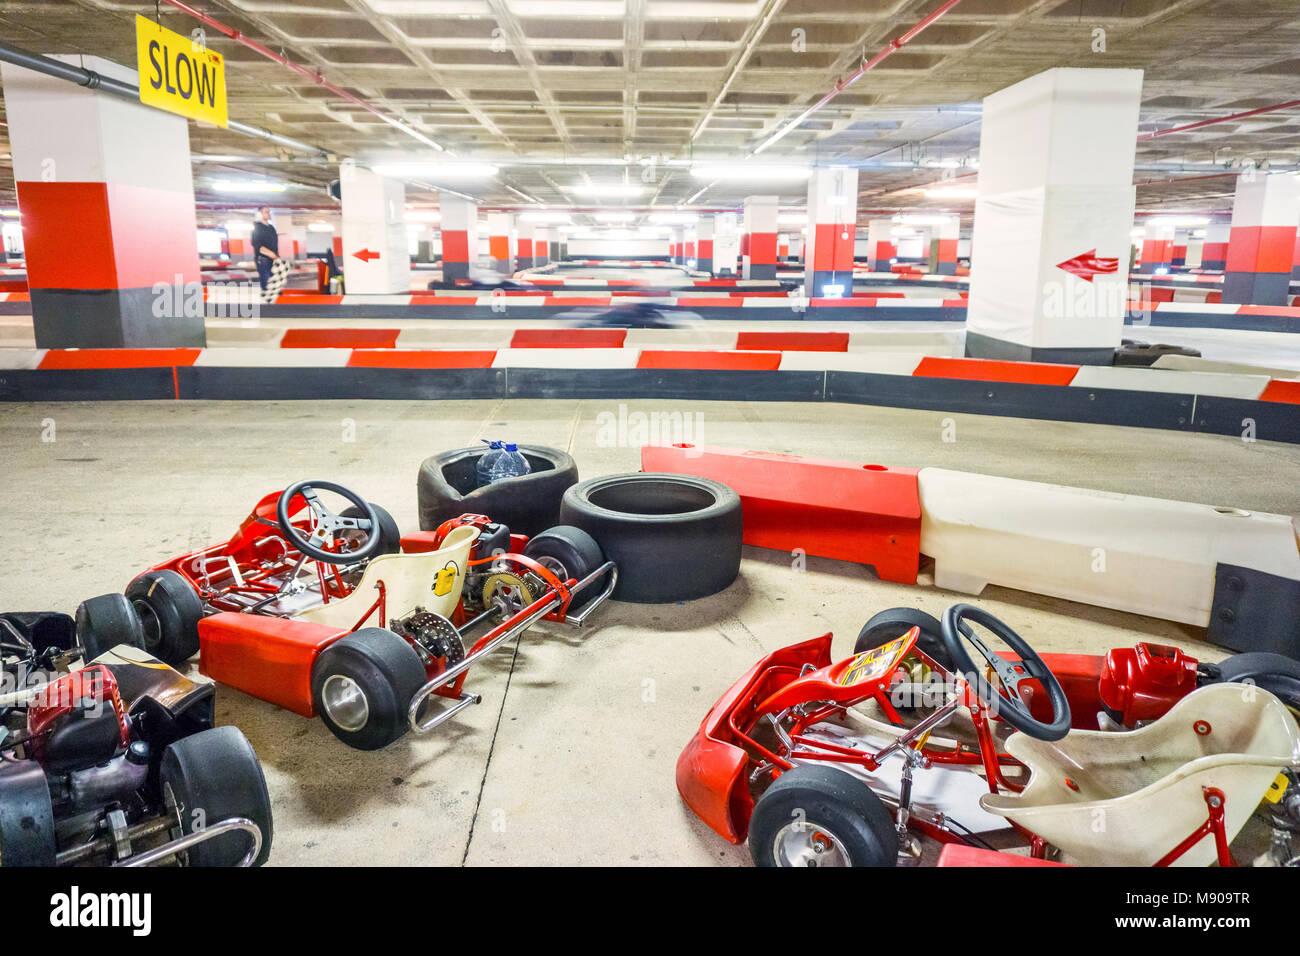 A few, red go karts on indoor karting track Stock Photo